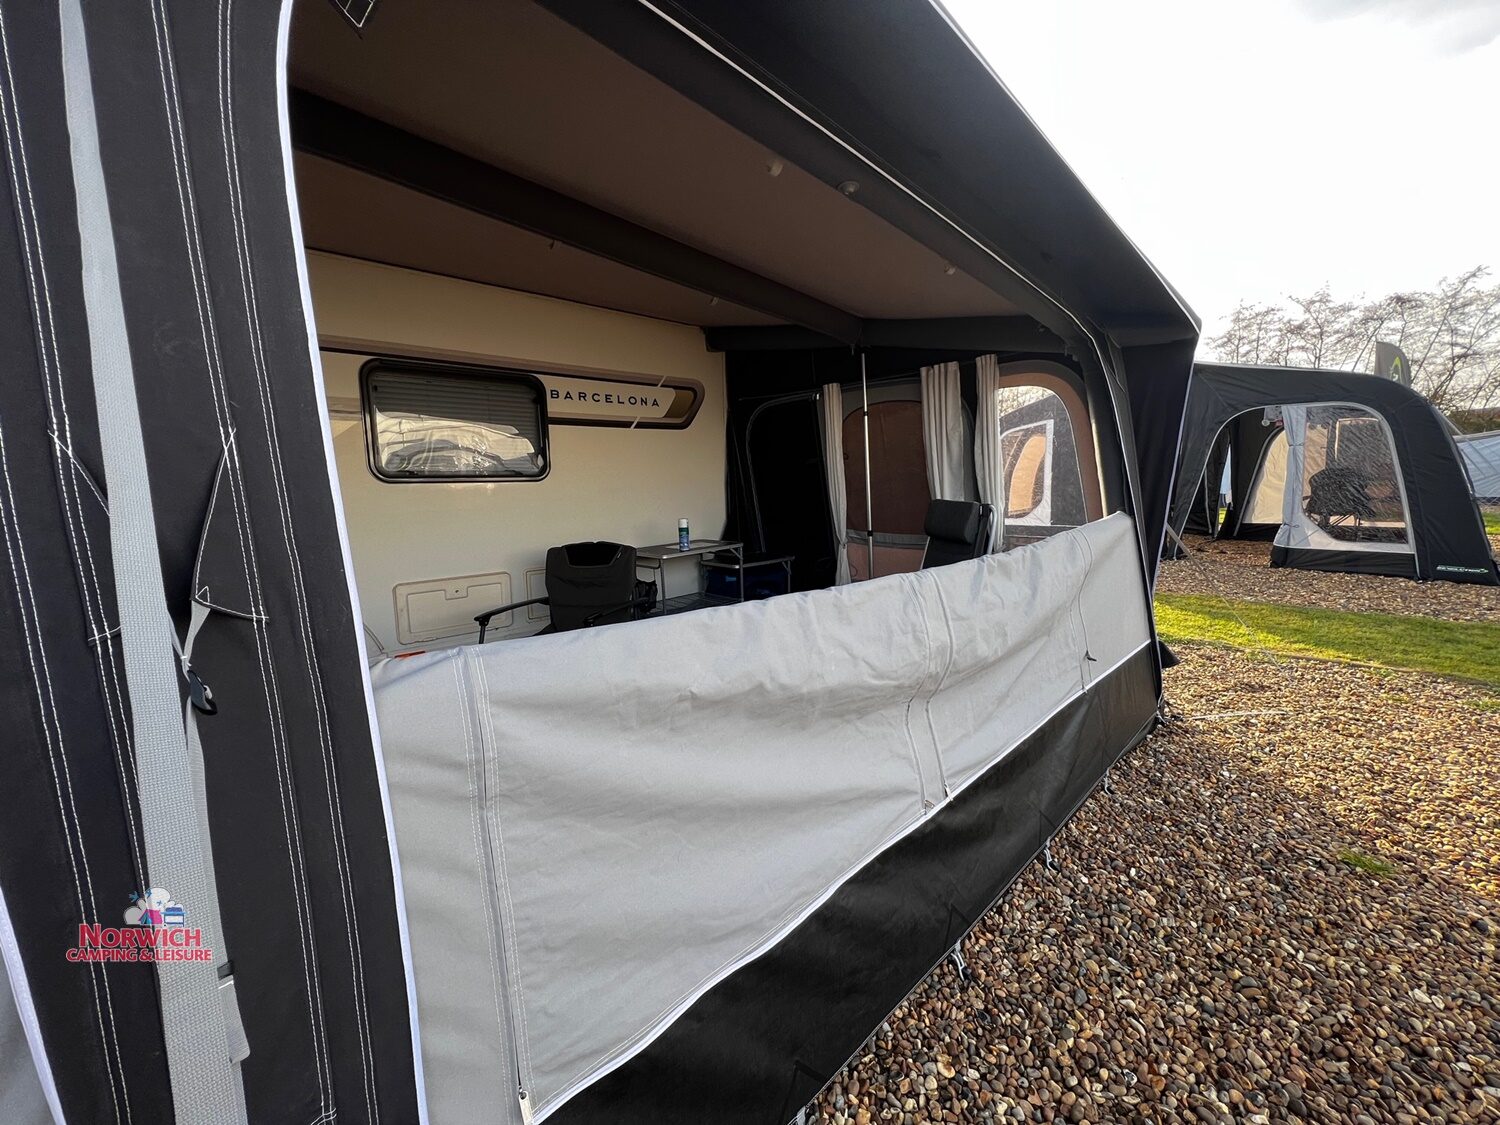 Dometic Residence All Season Awning On A Bailey Caravan At Norwich Camping 9